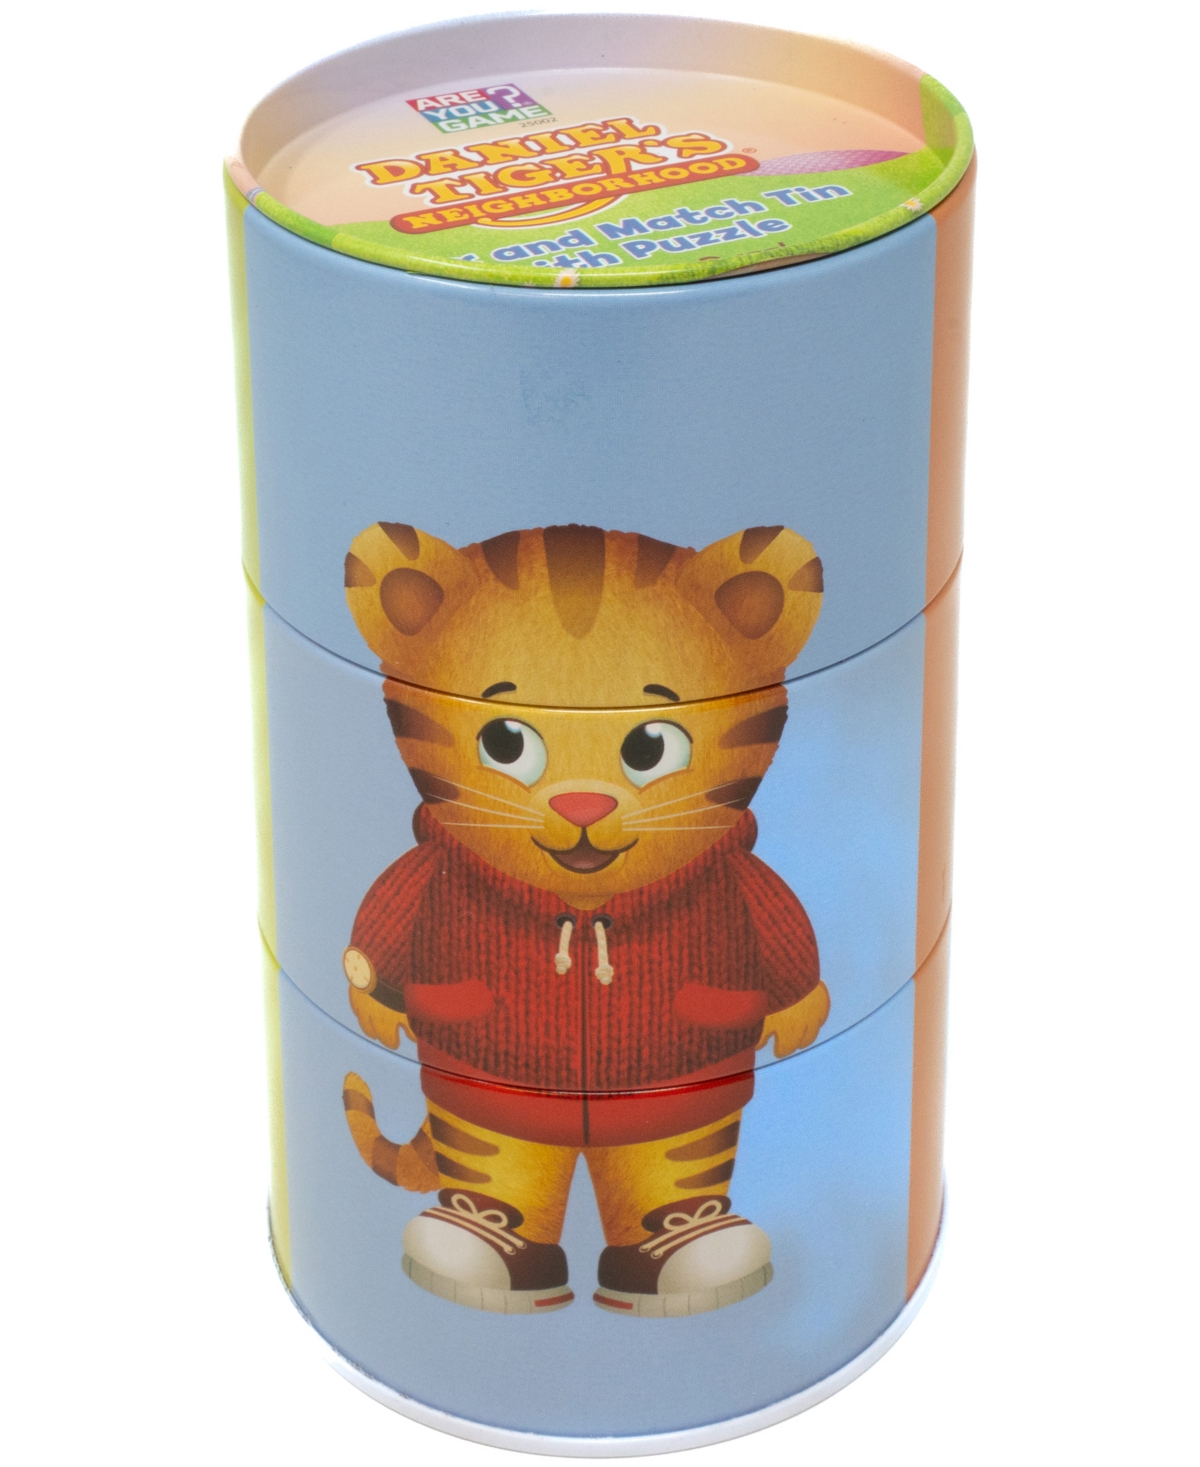 Areyougame Babies' .com Daniel Tiger's Neighborhood Mix And Match Tin With Puzzle Set, 25 Pieces In Multi Color